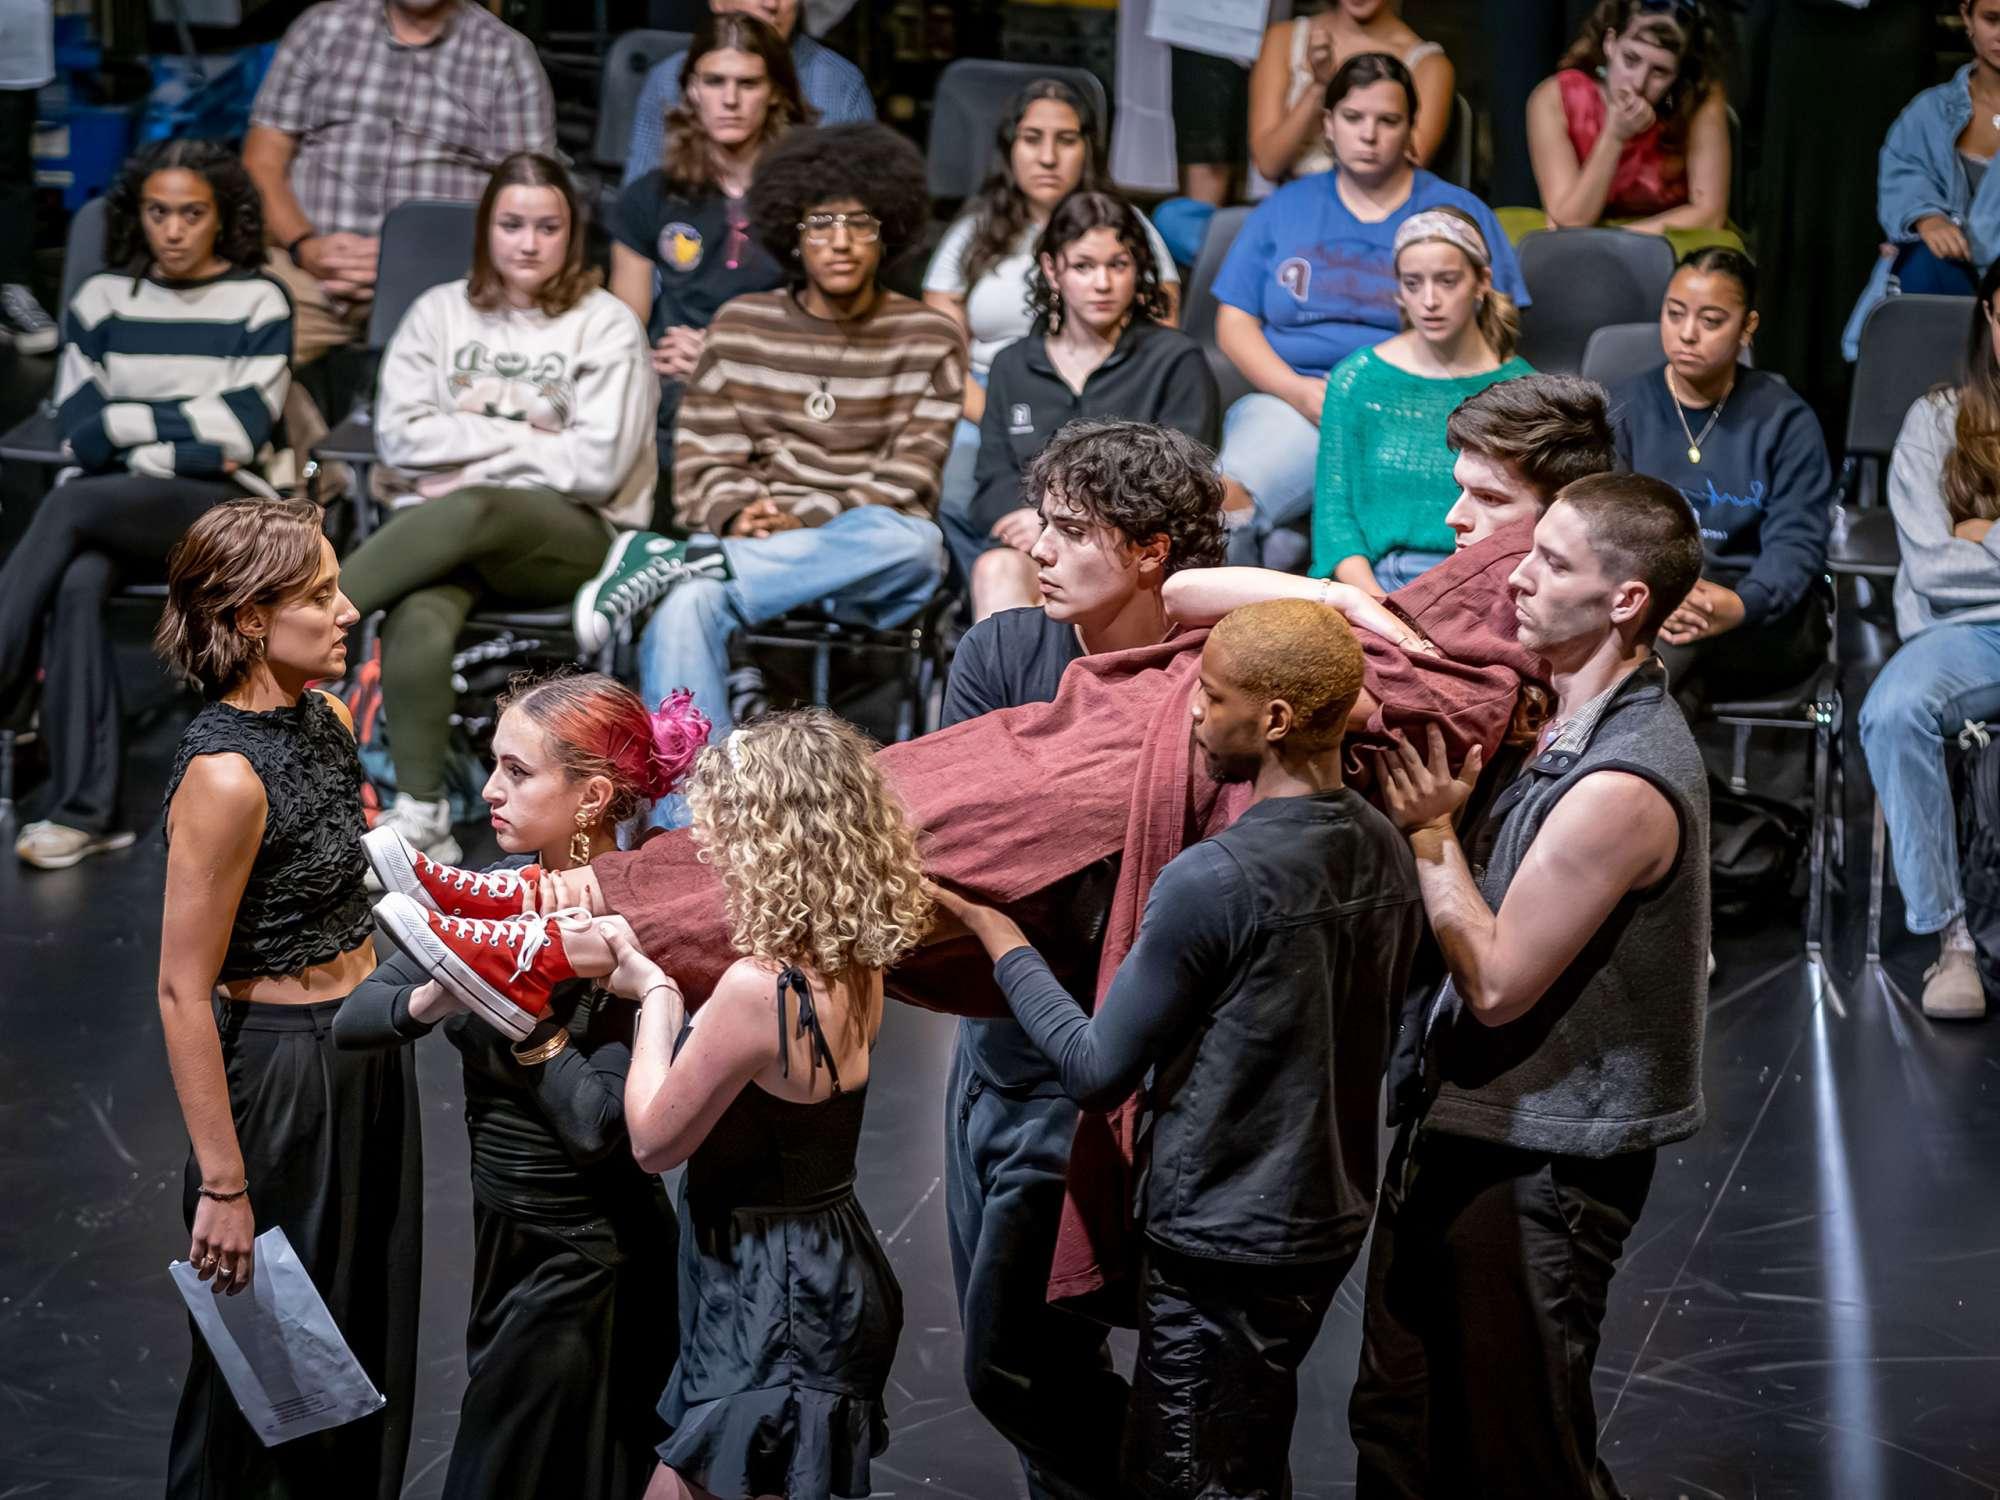 Five actors carry an actor wrapped in cloth as the audience seated on the stage looks on.